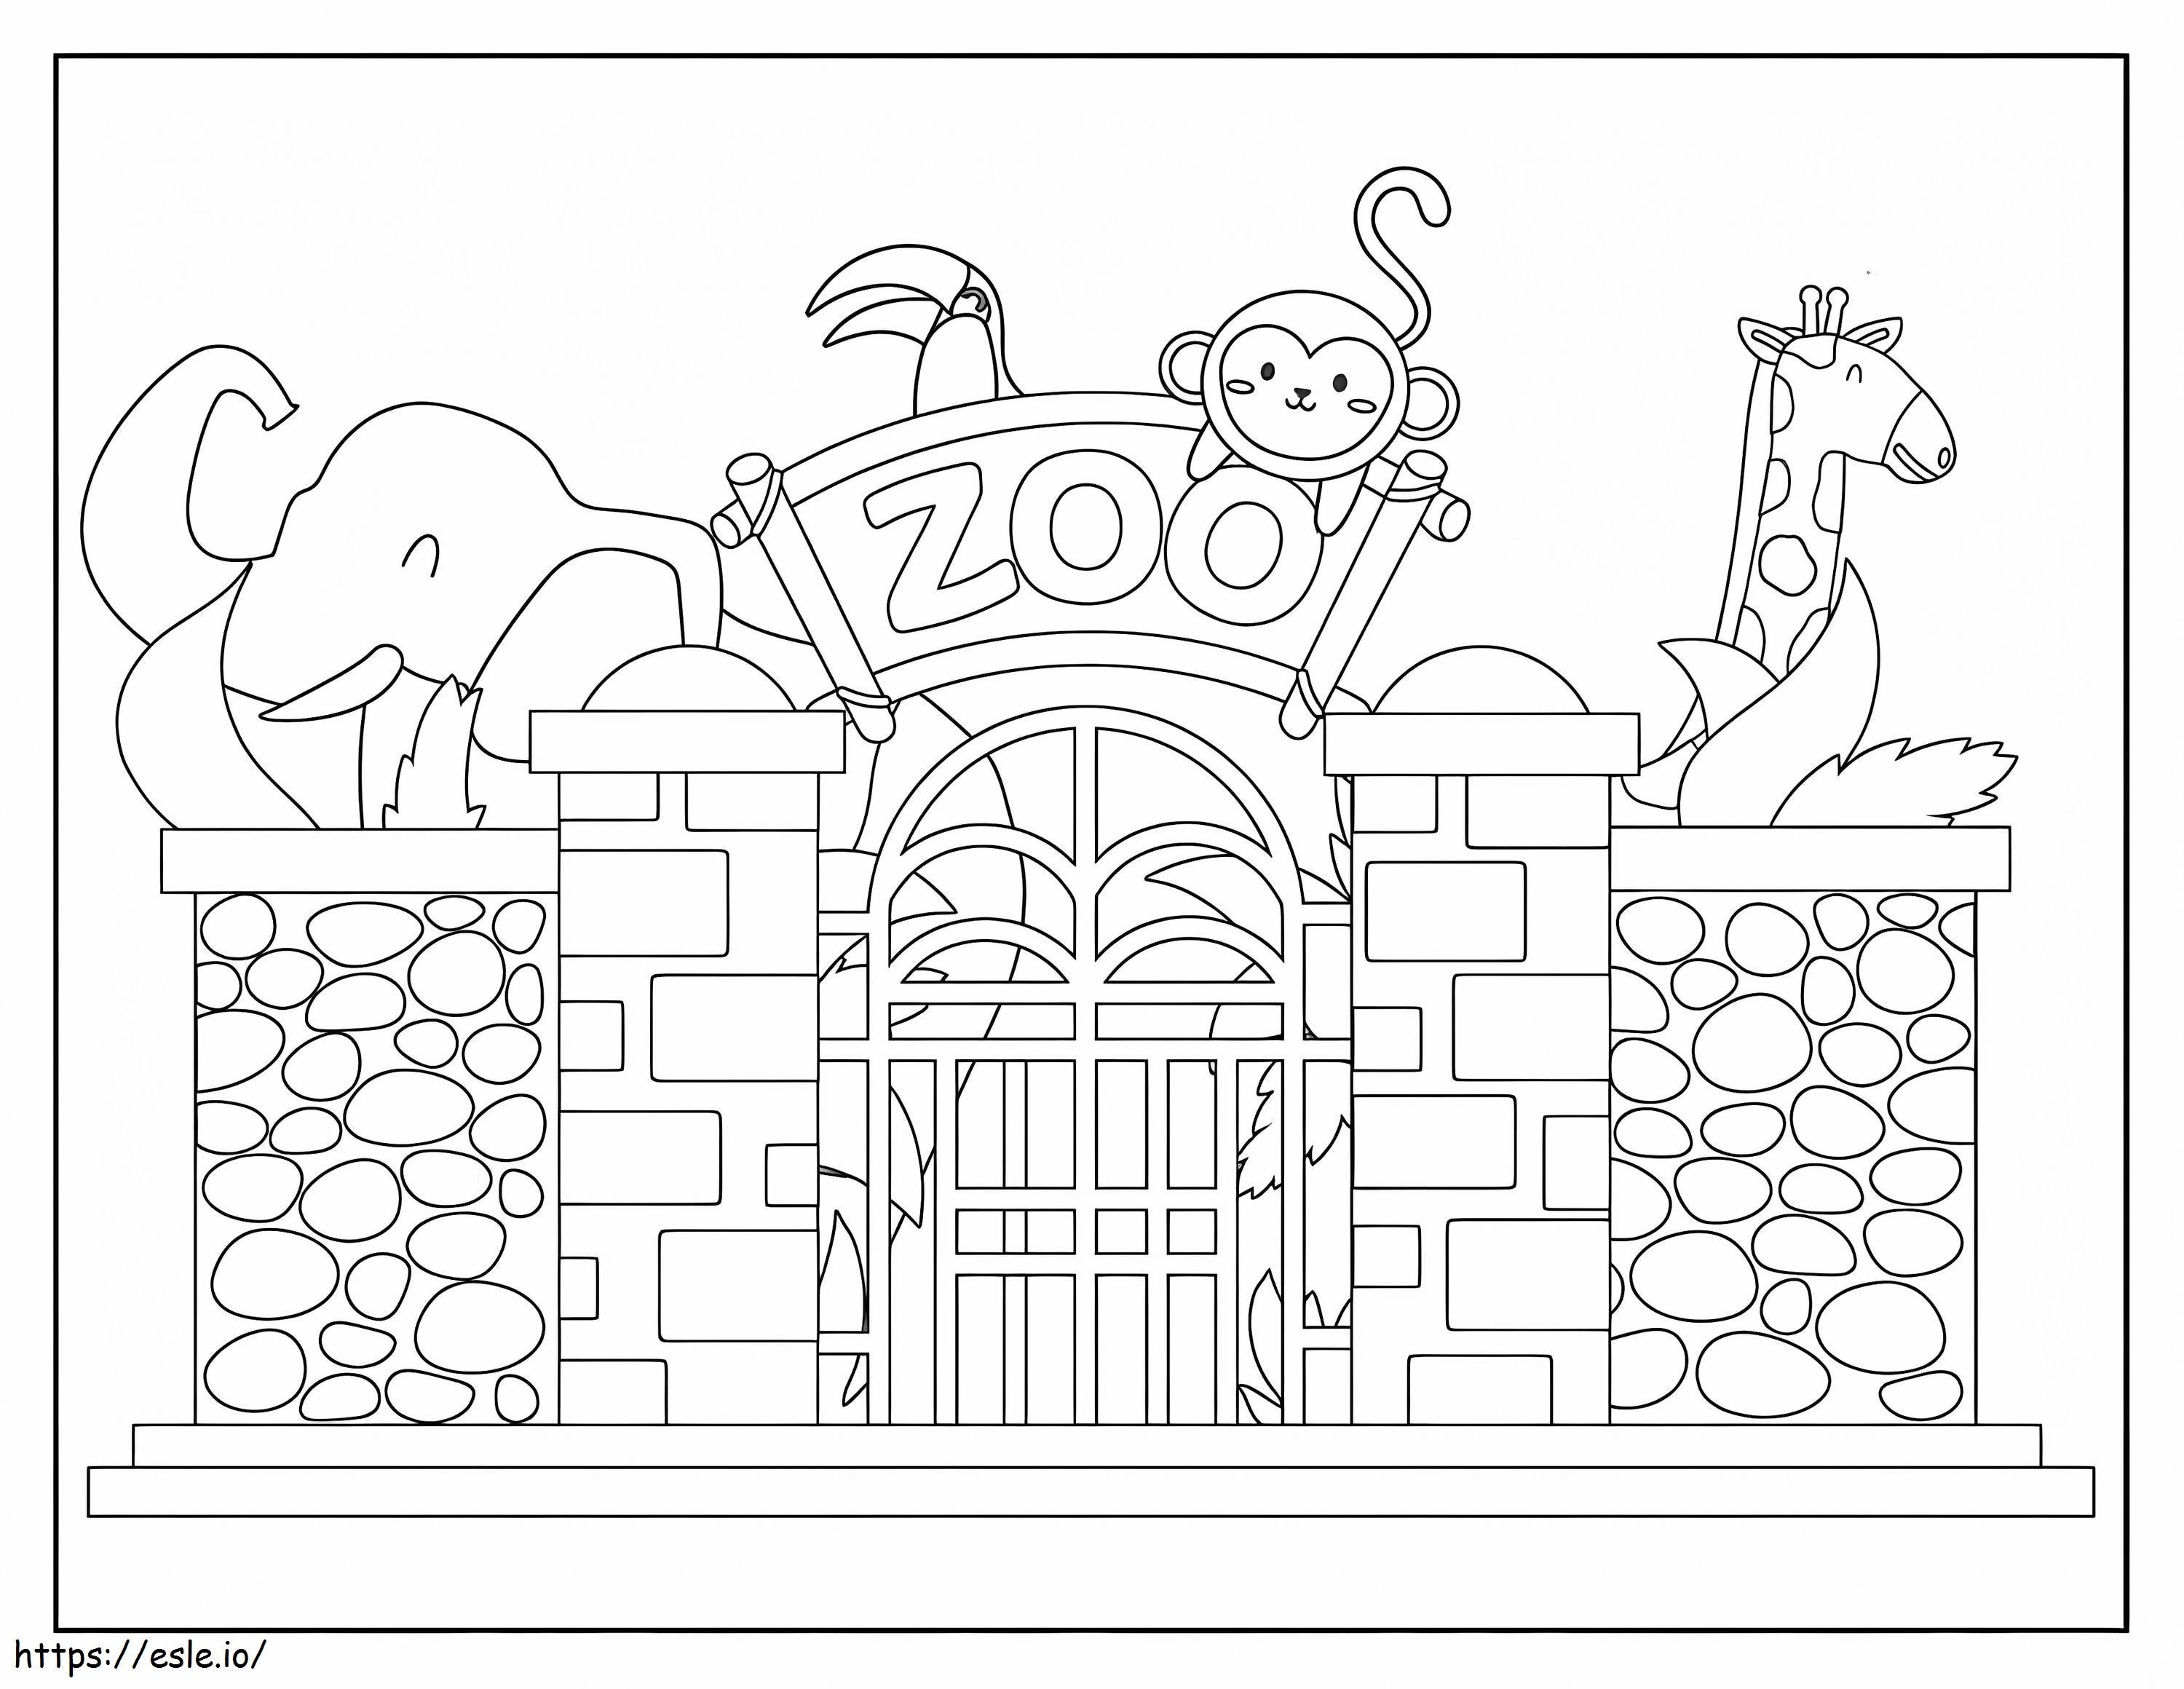 Cute Zoo coloring page